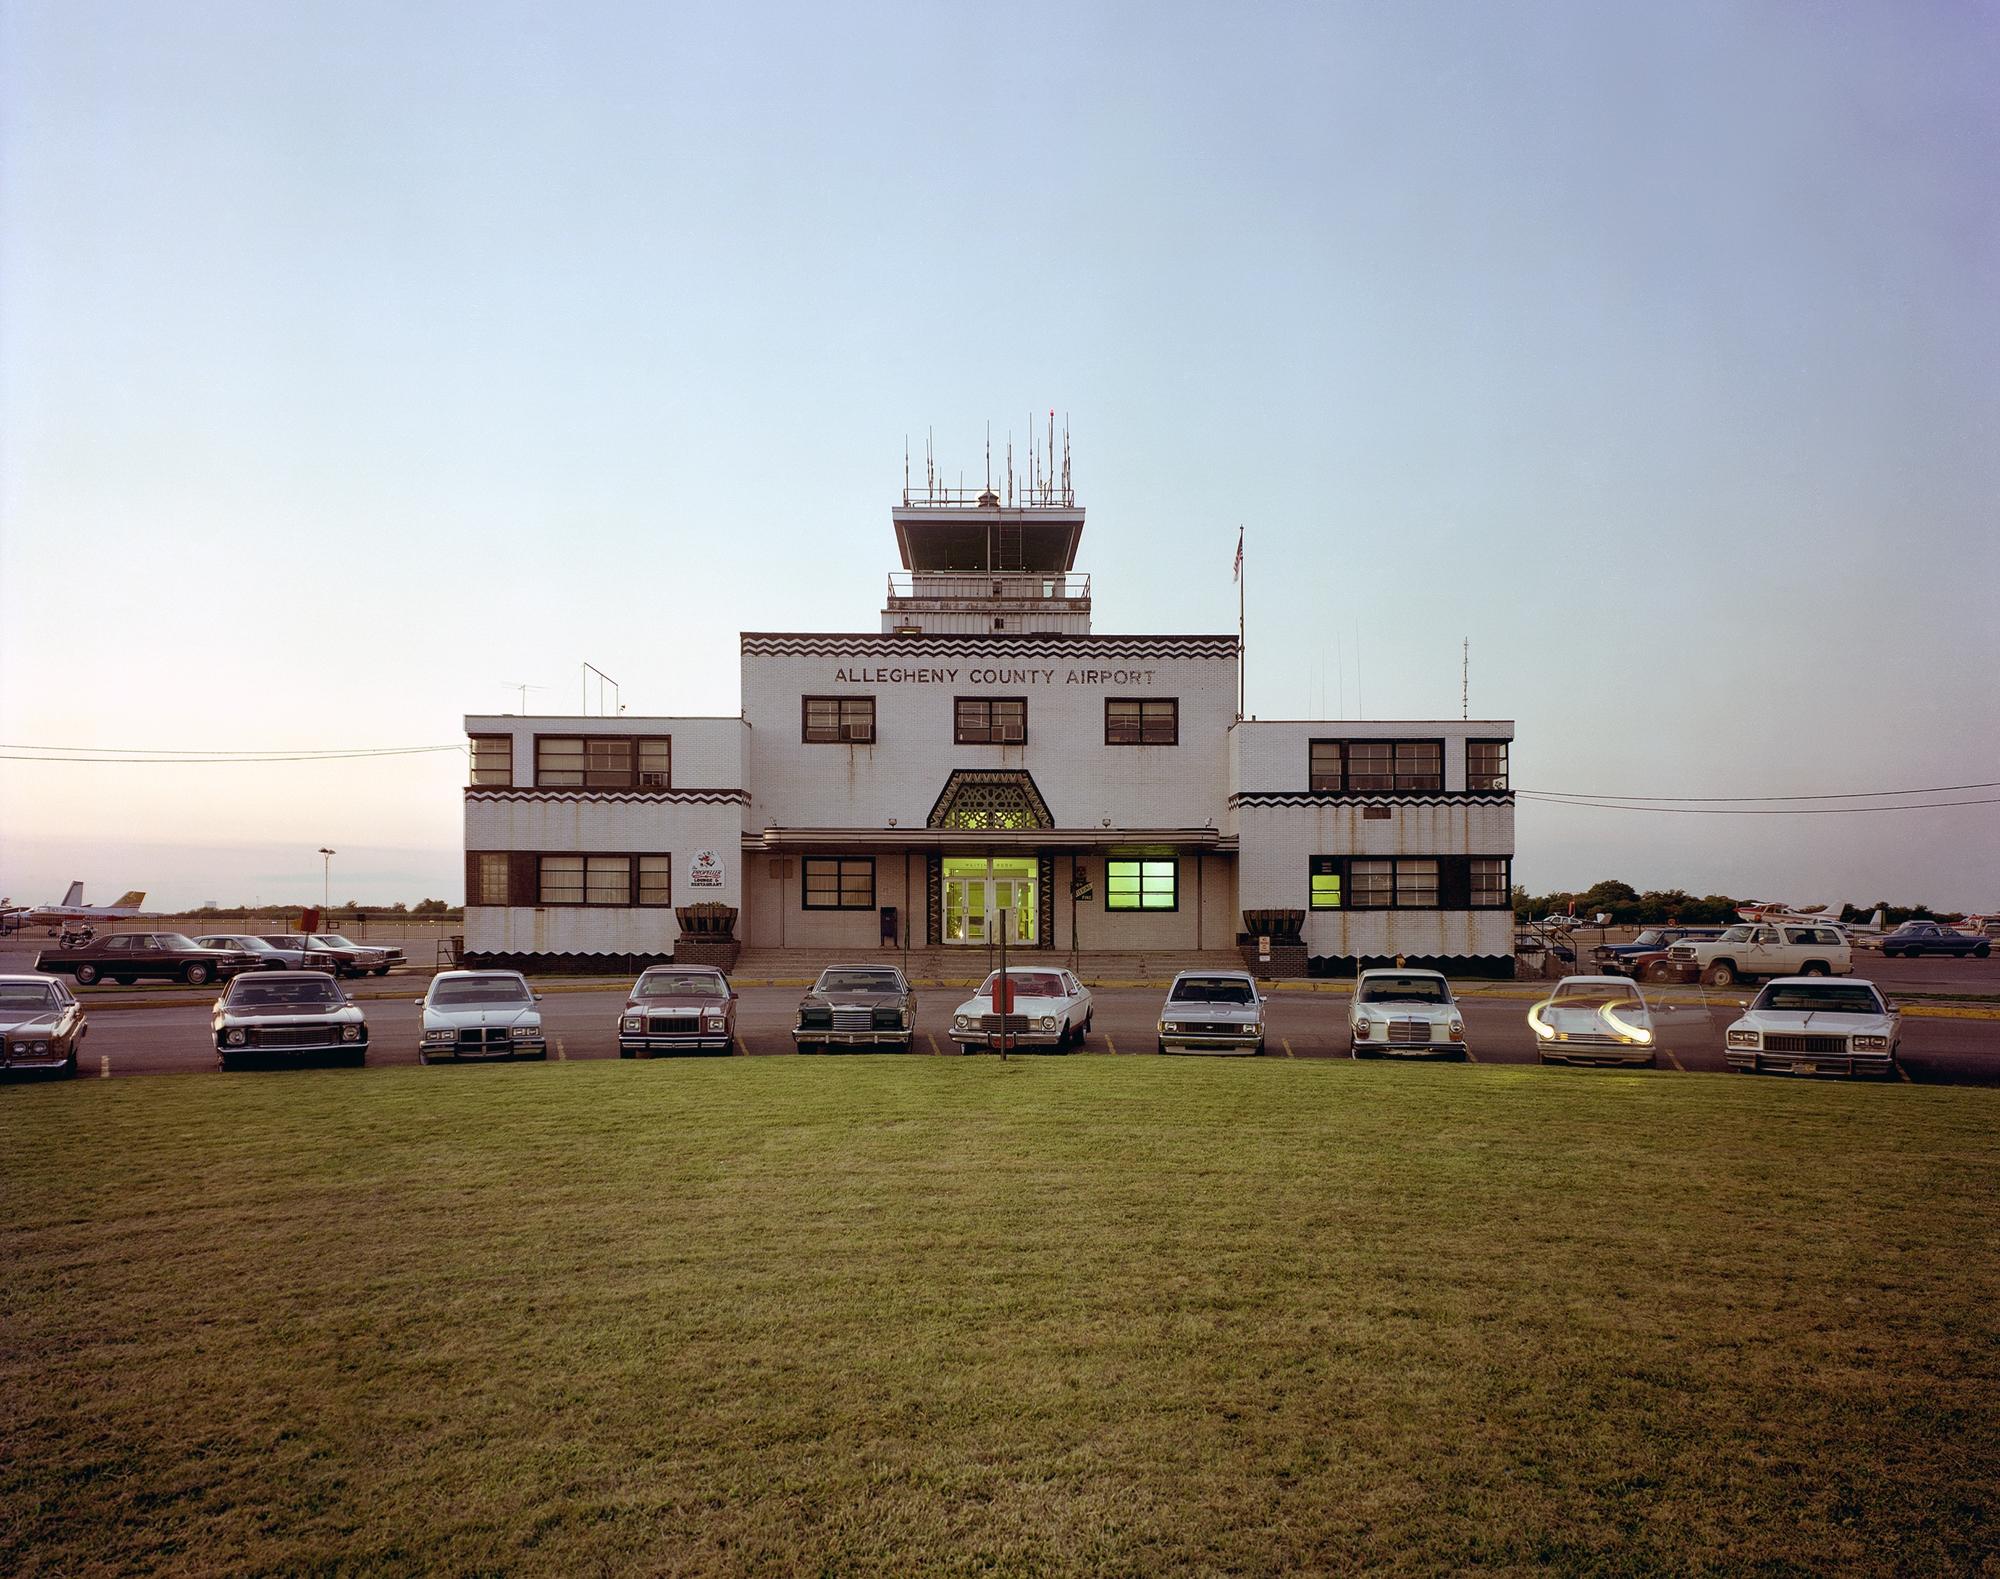 Joel Degrand Color Photograph - Allegheny County Airport, Pittsburgh, PA, Photograph, Archival Ink Jet